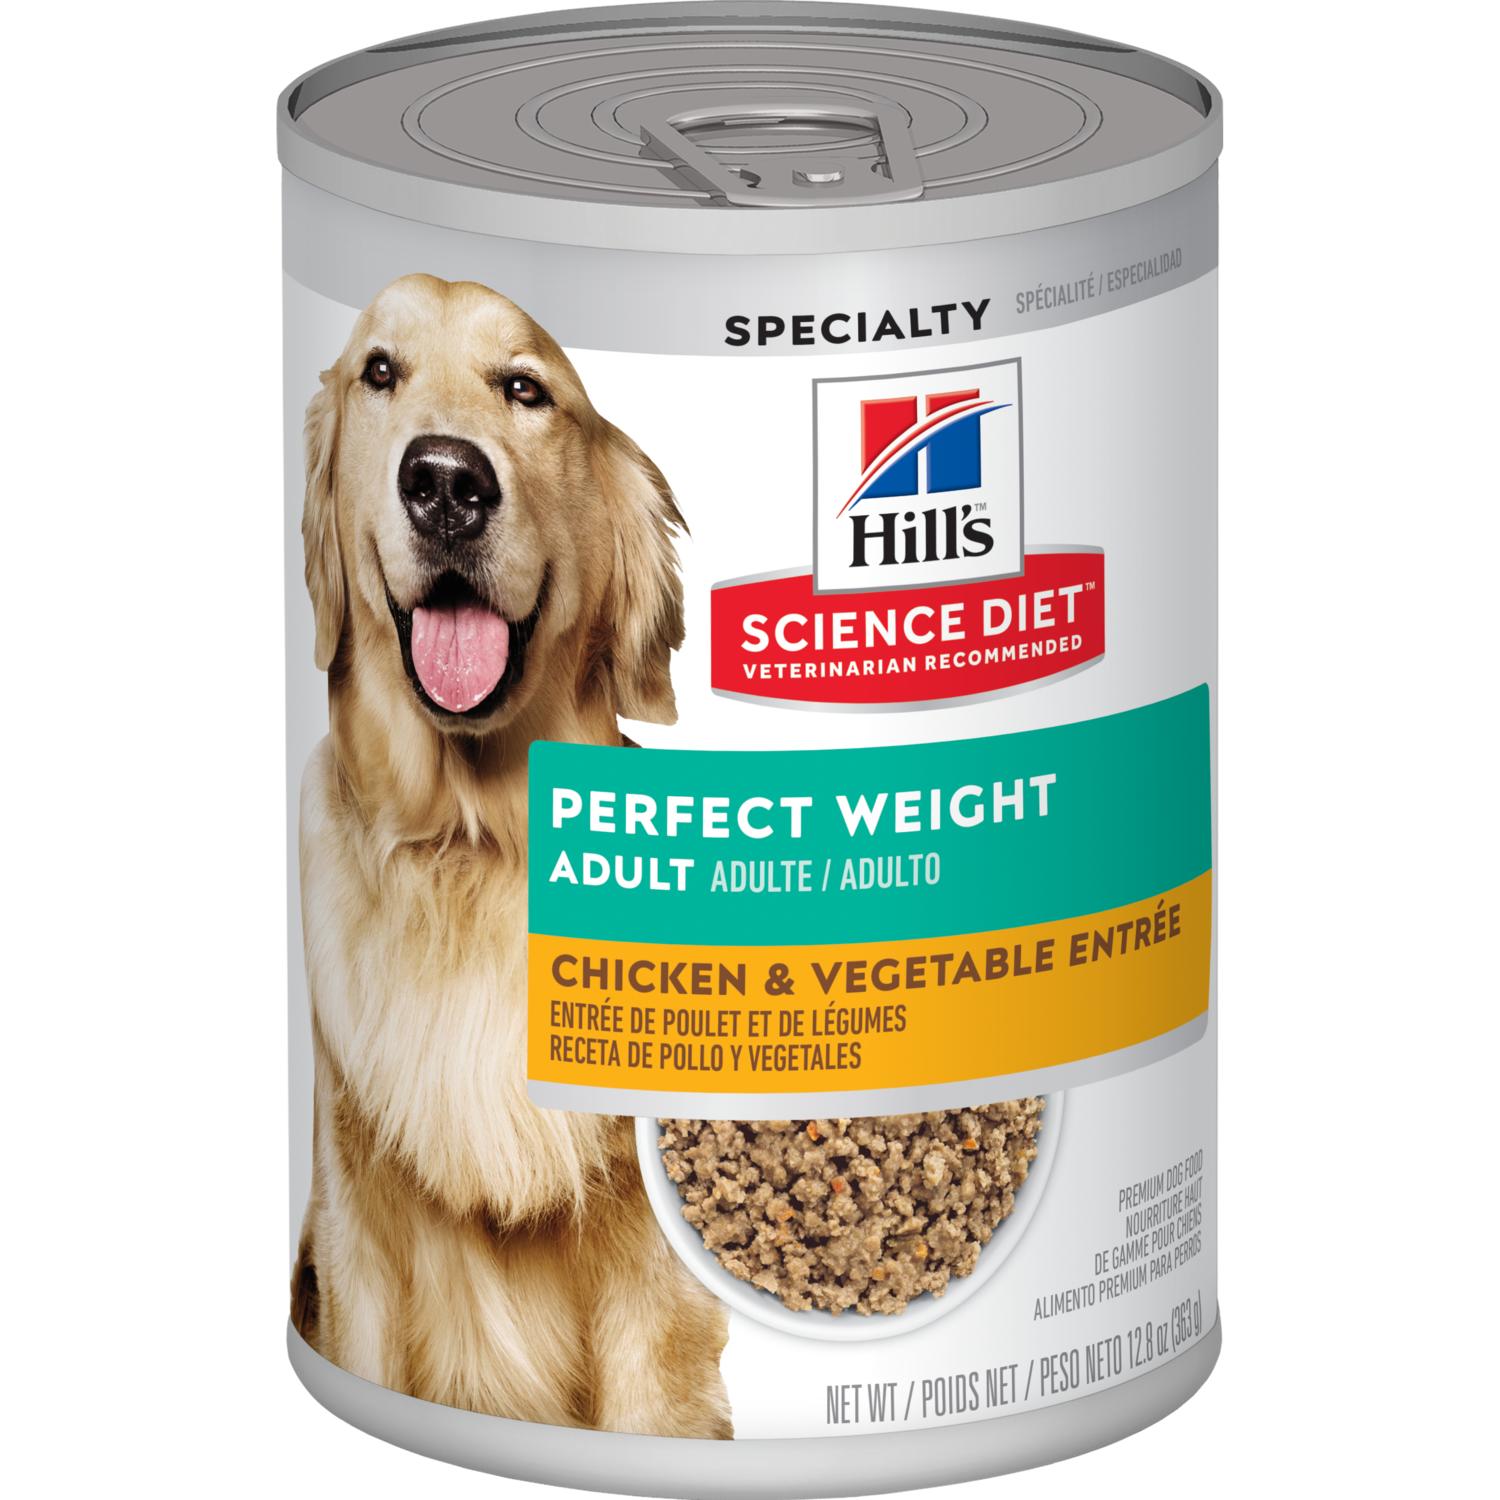 Science Diet Adult Perfect Weight Chicken & Vegetable Entrée Wet Dog Food